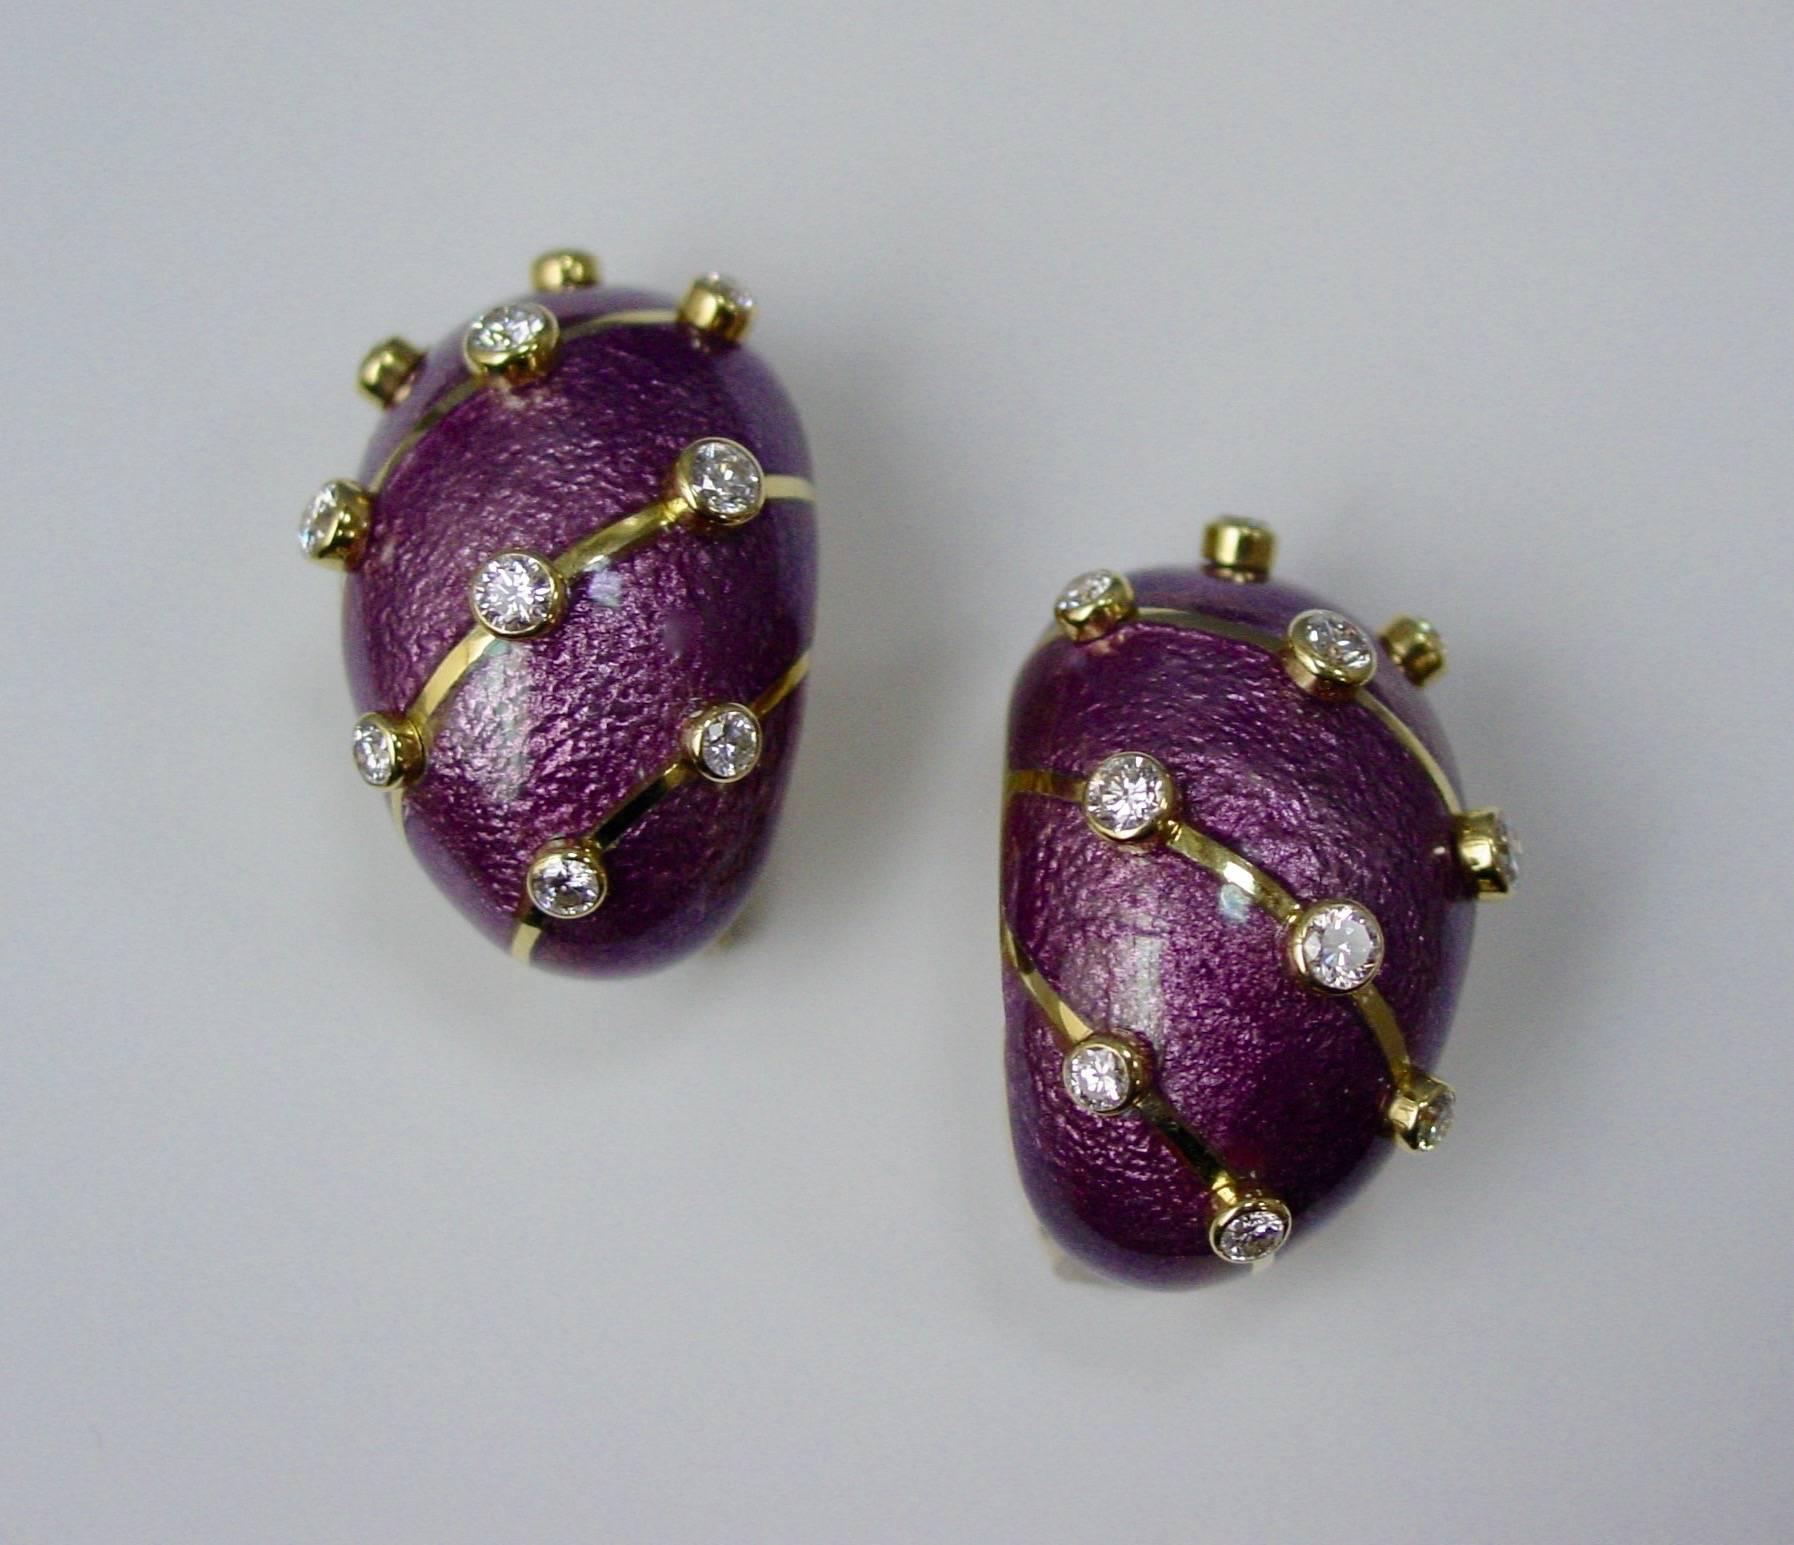 Tiffany & Co. Schlumberger Purple Paillonne Enamel and Diamond Earclips In Excellent Condition For Sale In Beverly Hills, CA